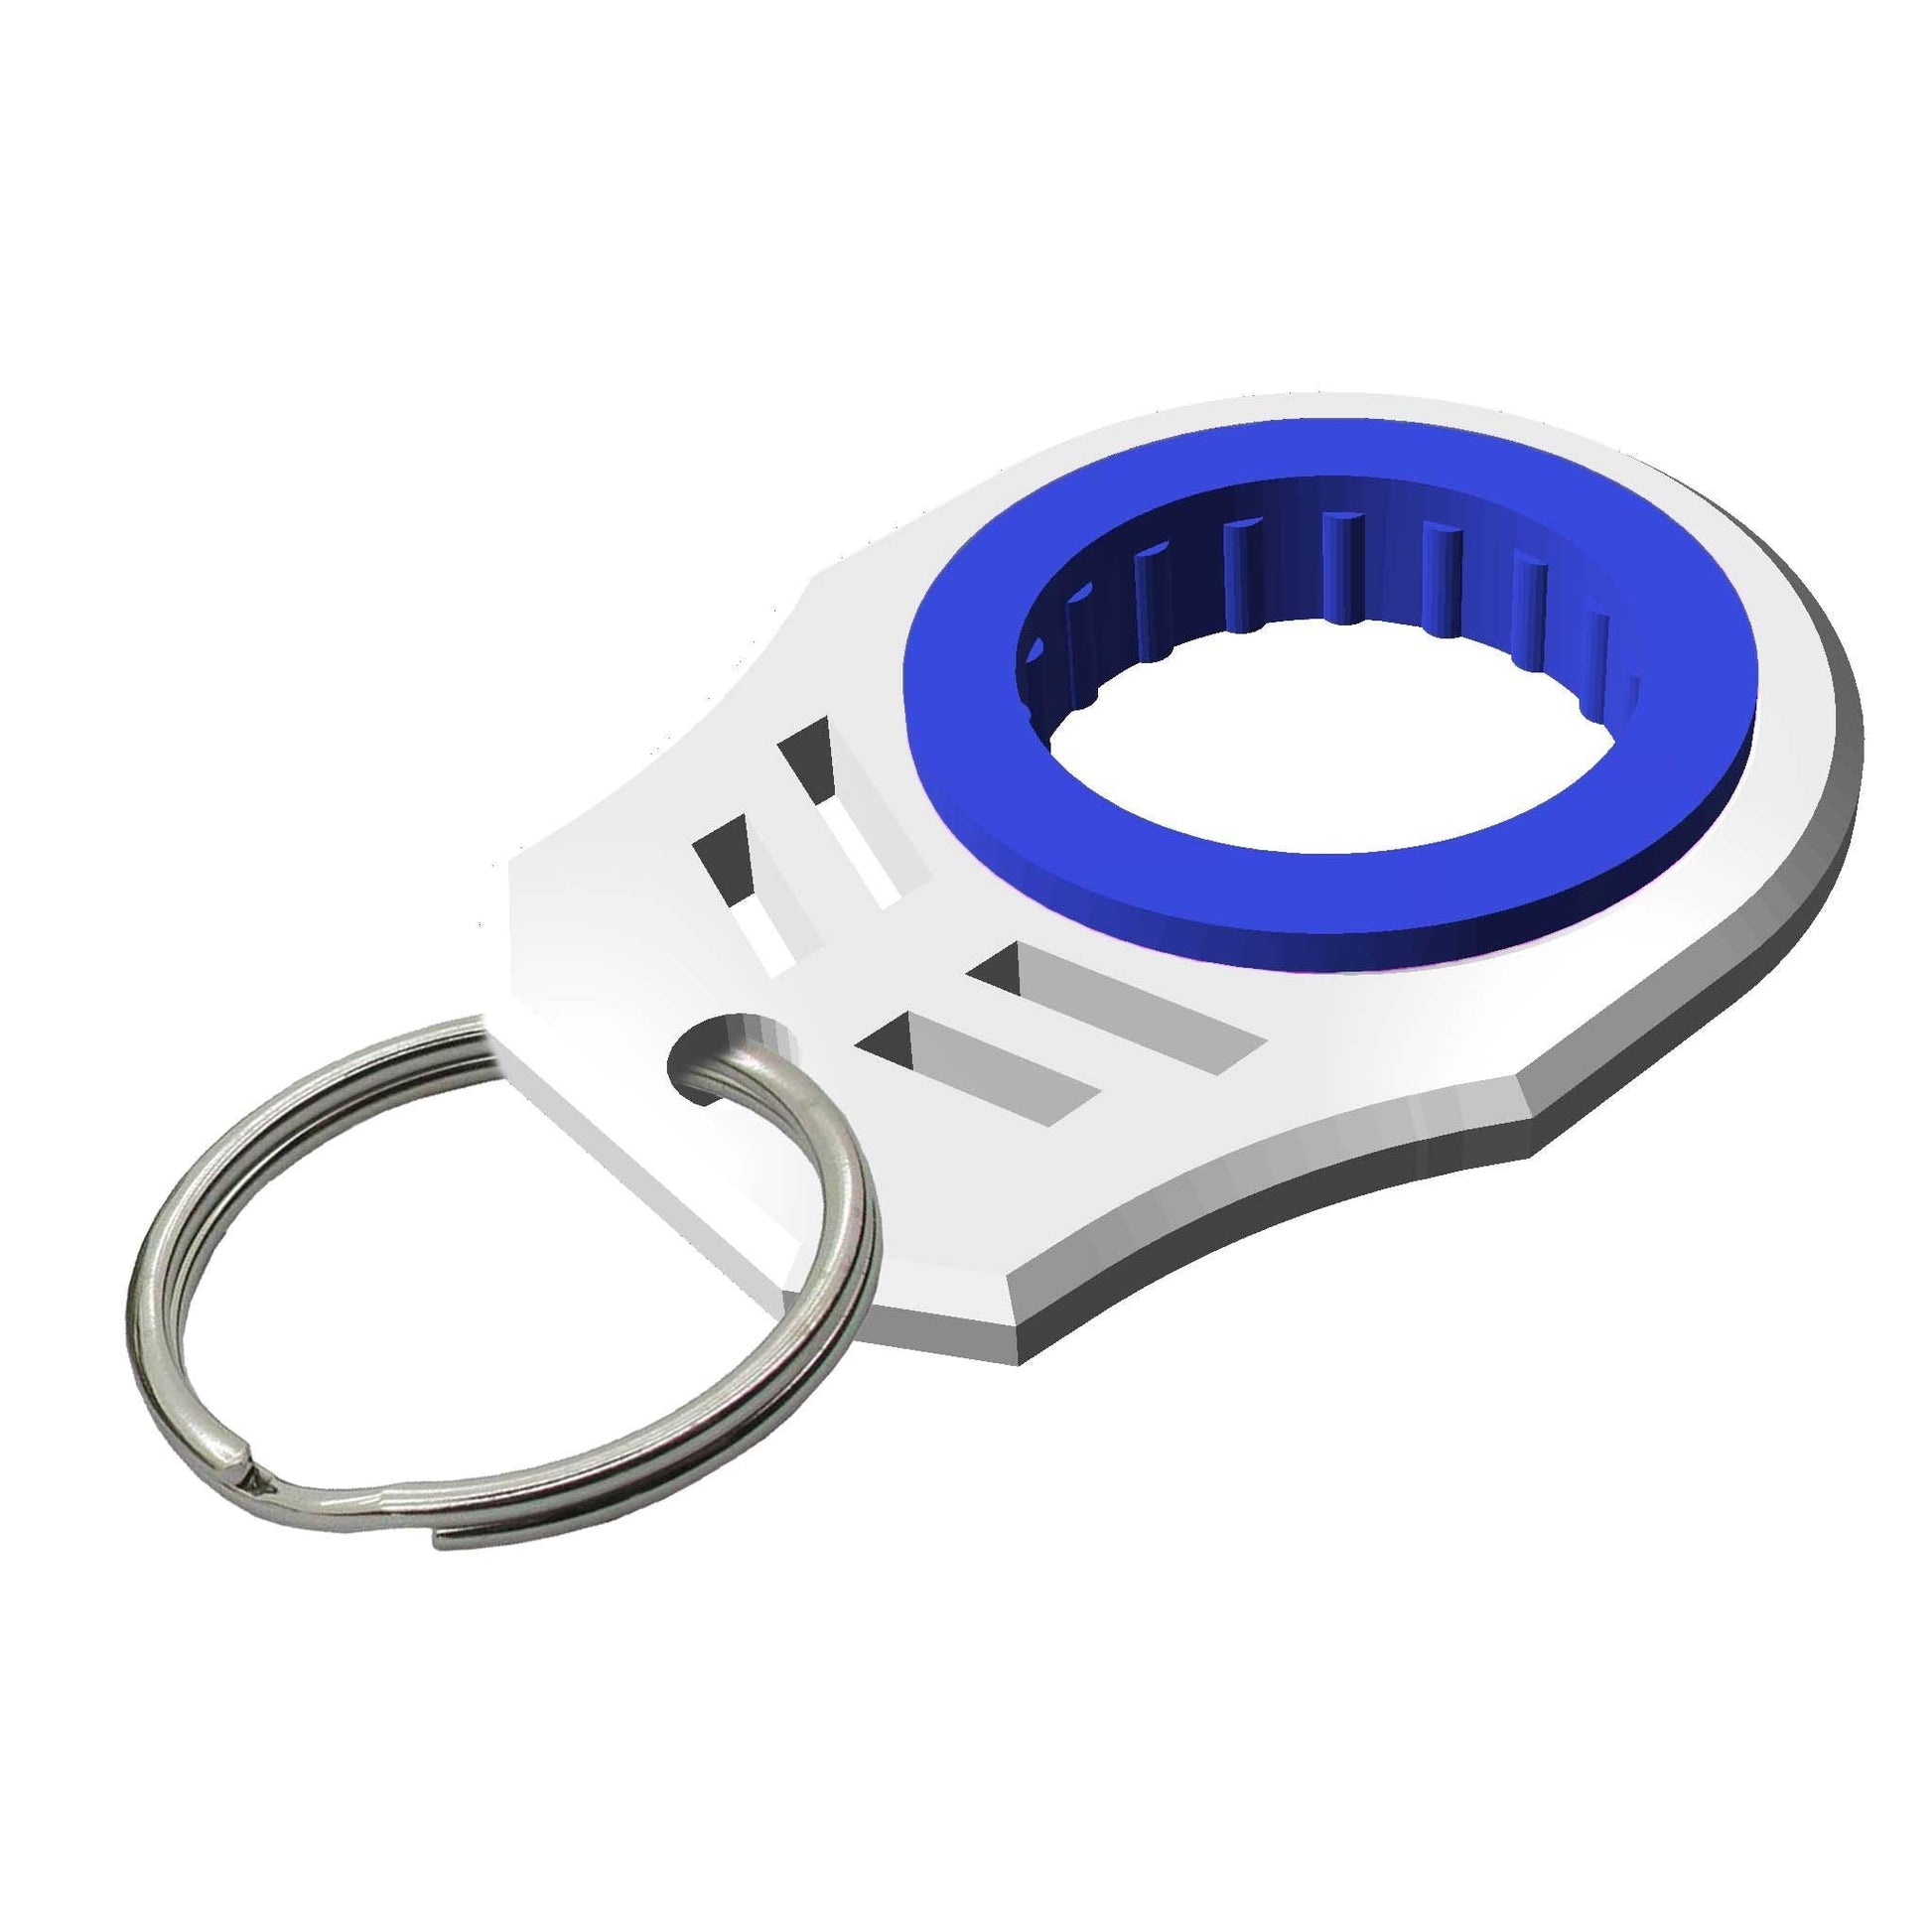 Key Spinner for Fidgeting and Relaxation